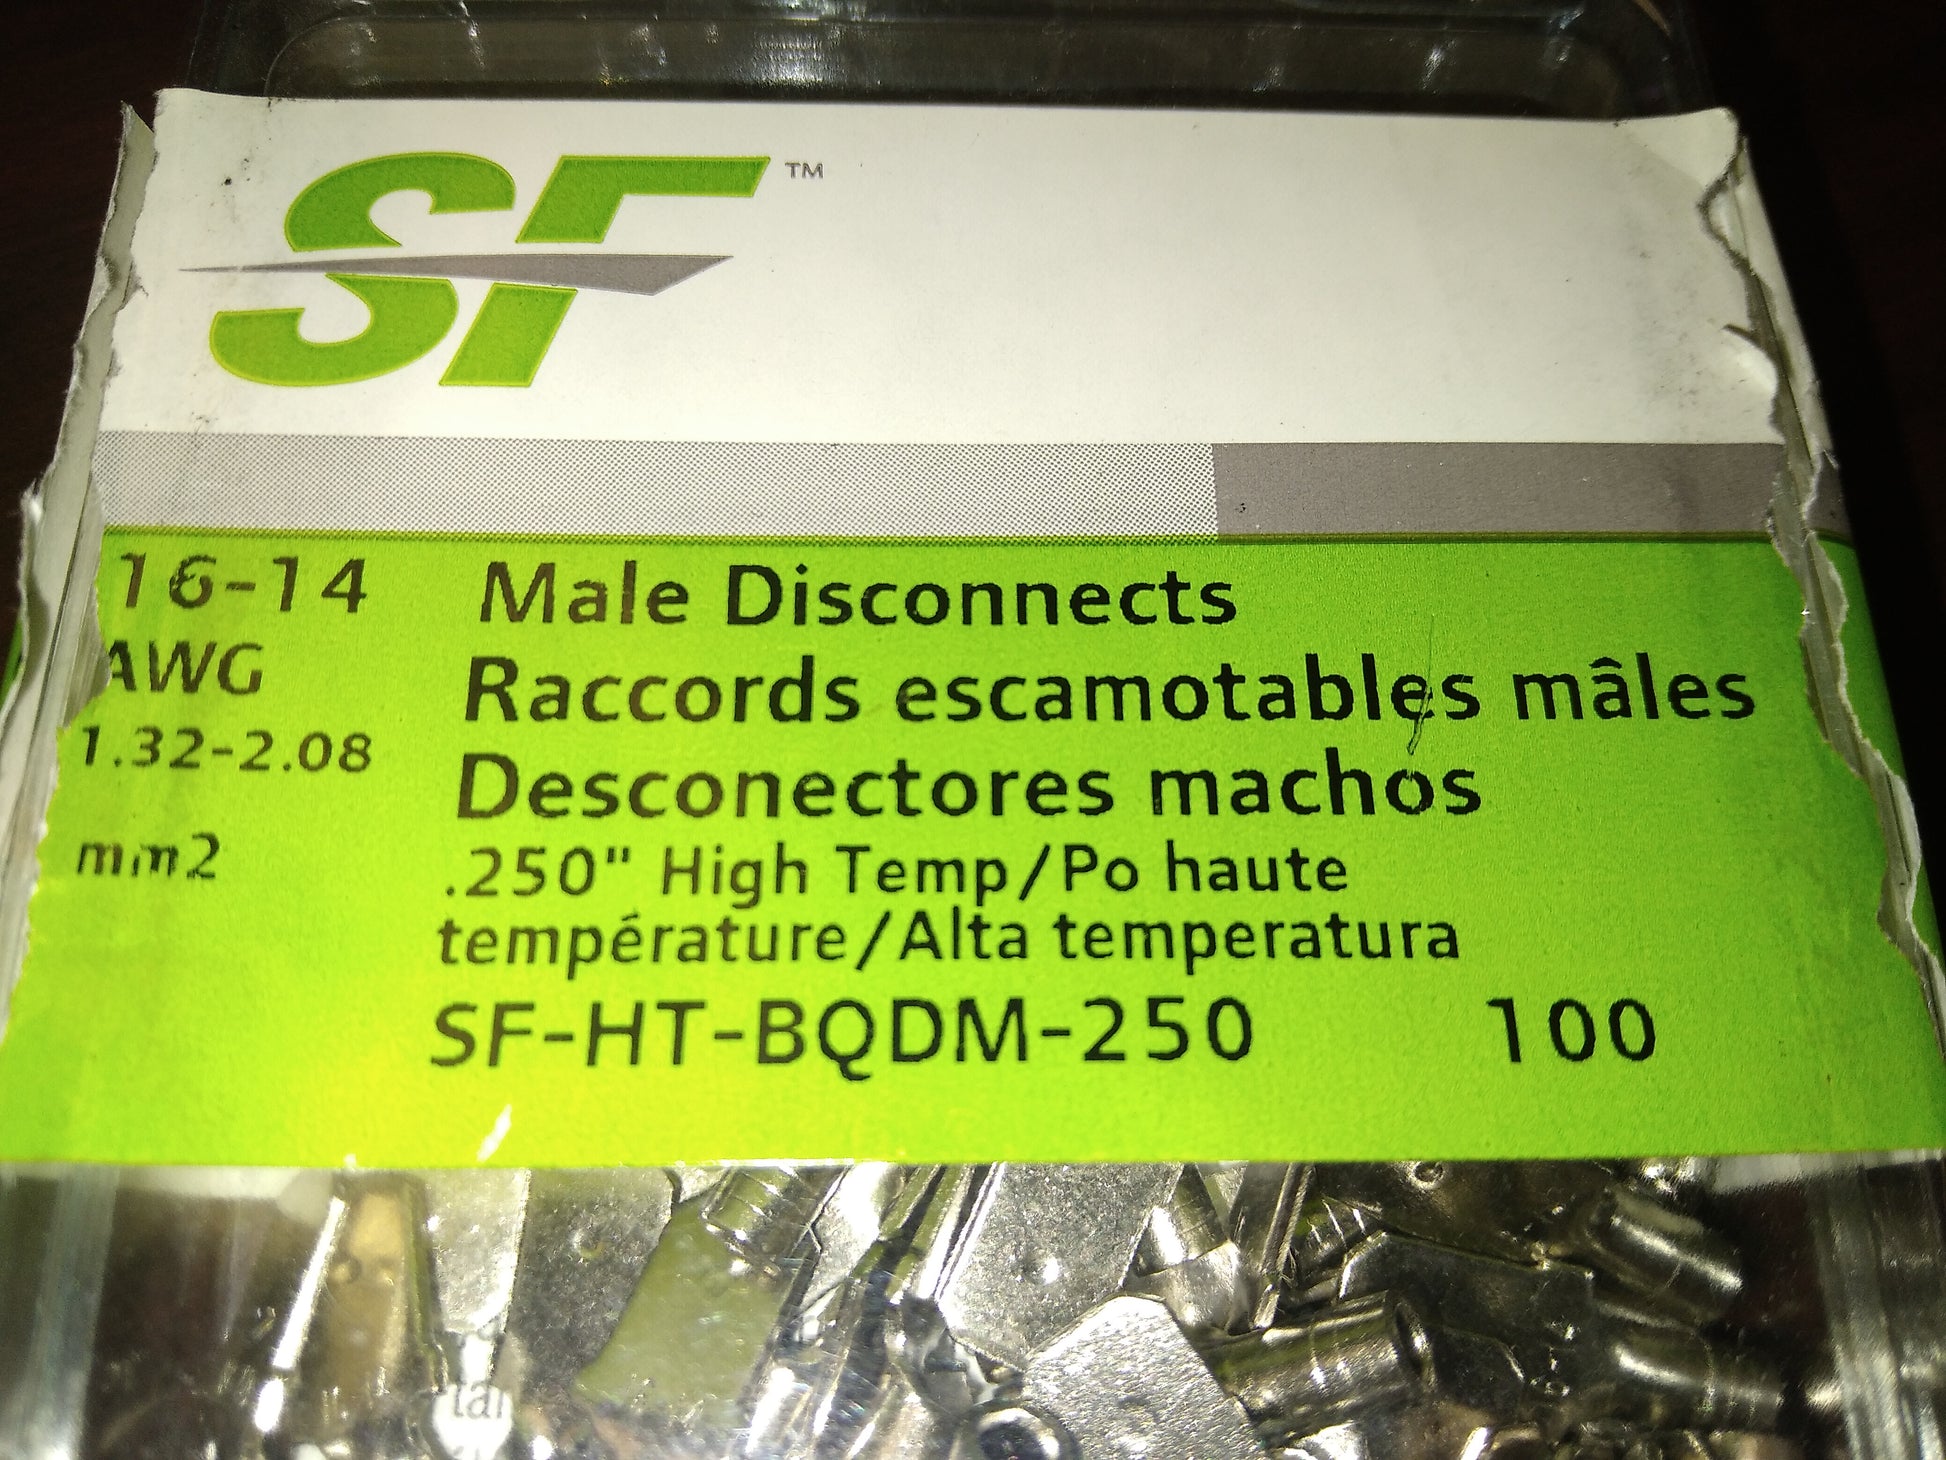 16-14 AWG 1/4" HIGH TEMP MALE DISCONNECTS (100 PER PACK)